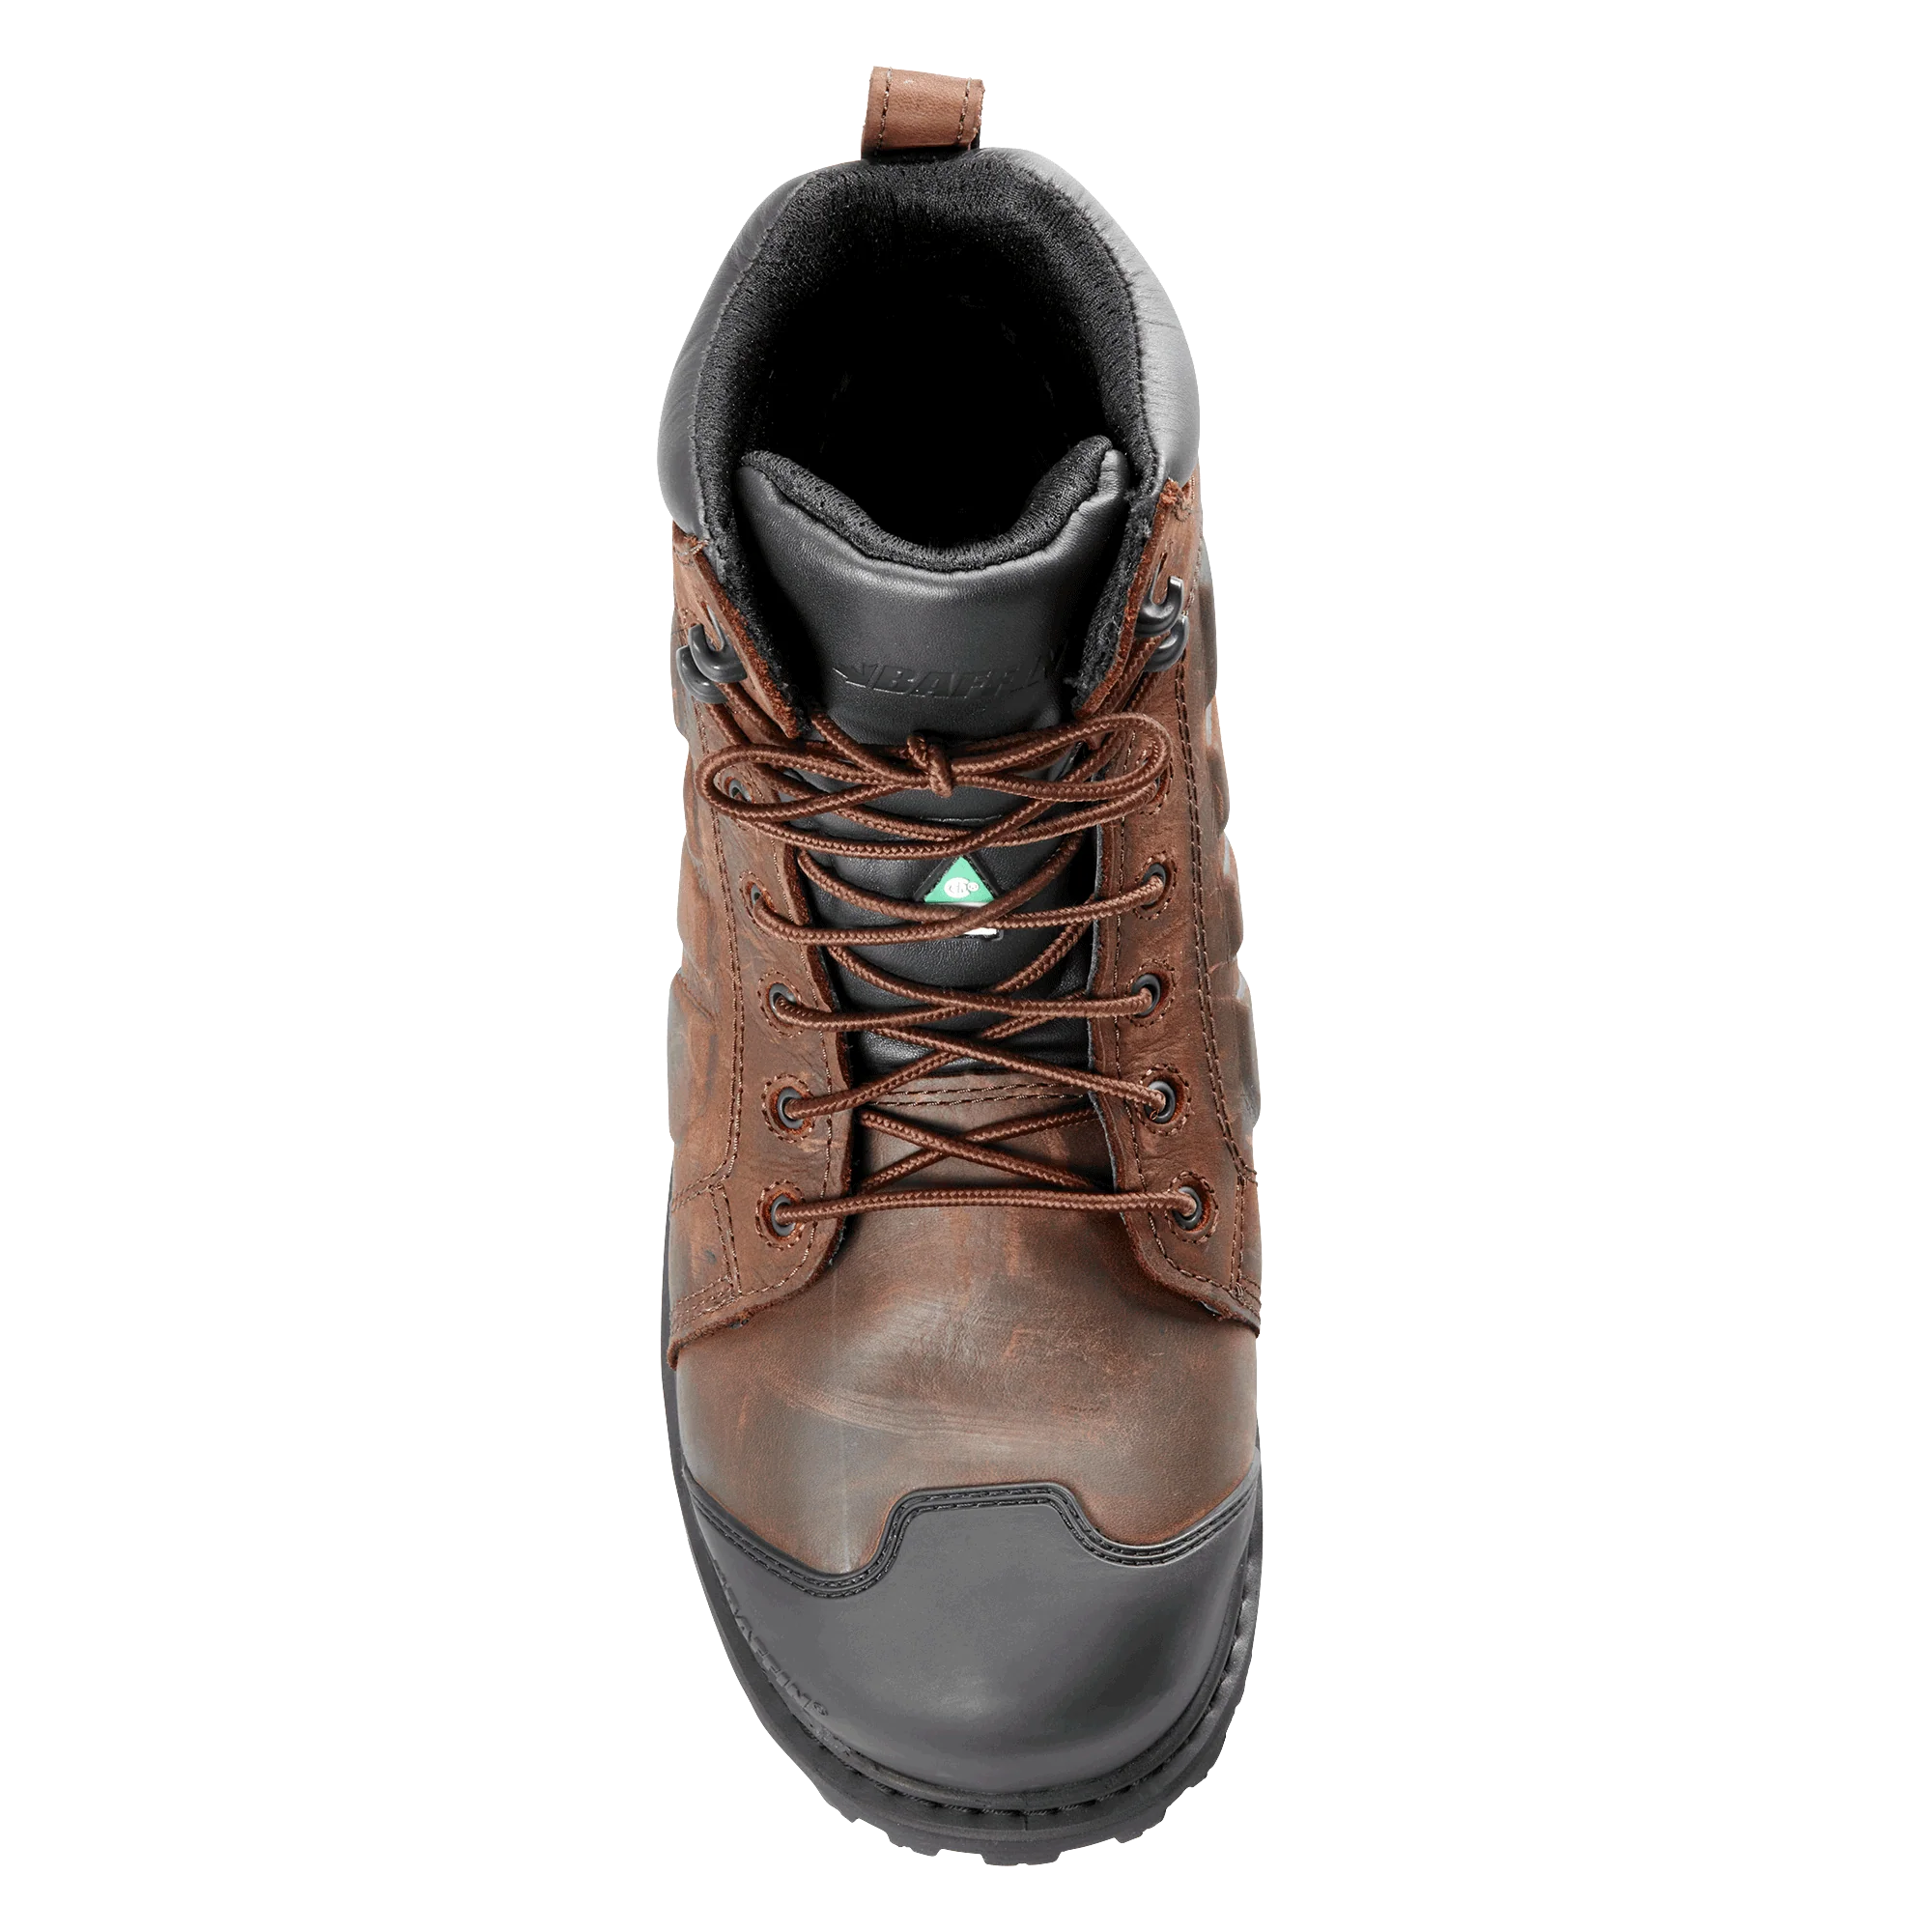 STC – Monster – Boot – #MNST-MP02 – Brown – Top